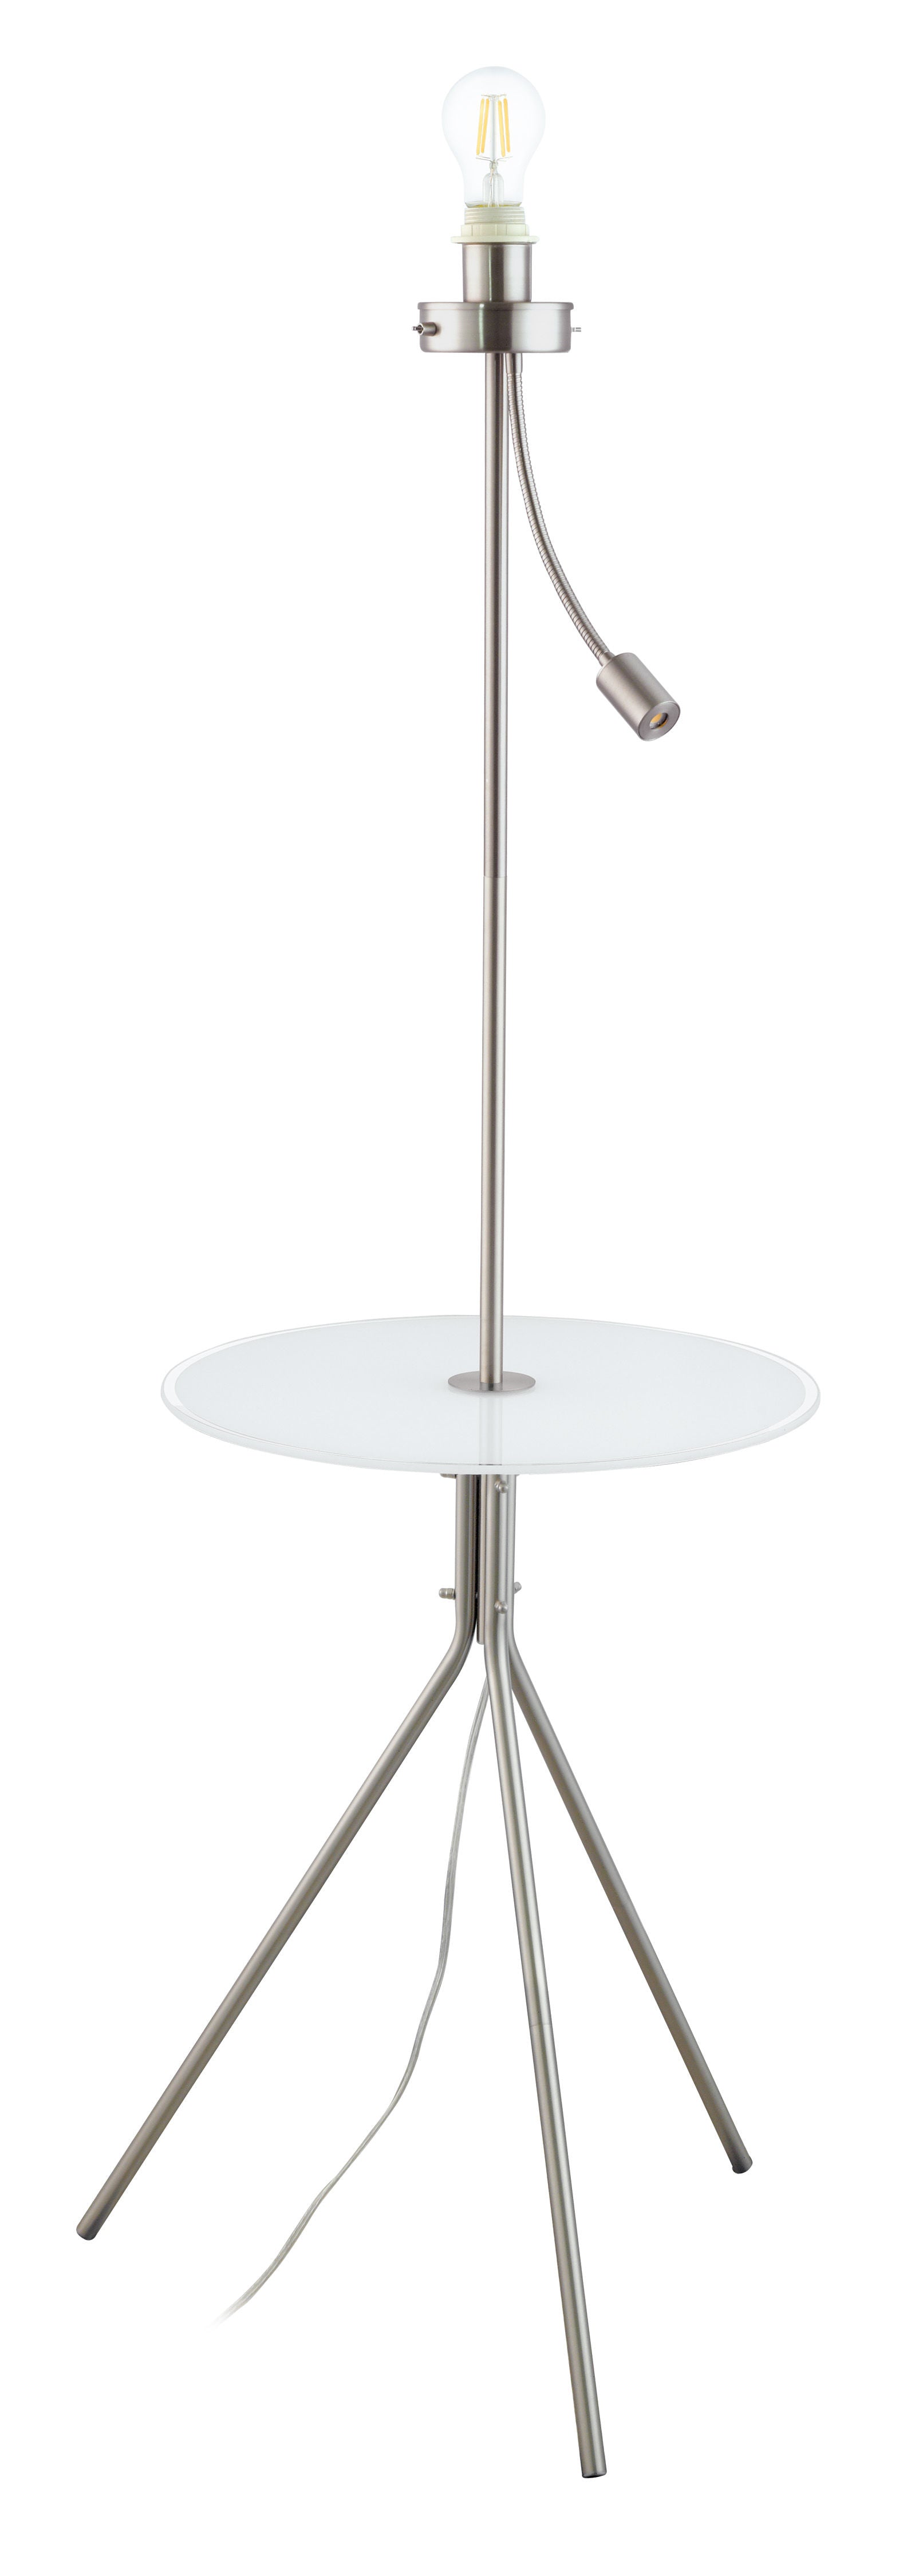 Policara Floor lamp Stainless steel INTEGRATED LED - 203676A | EGLO